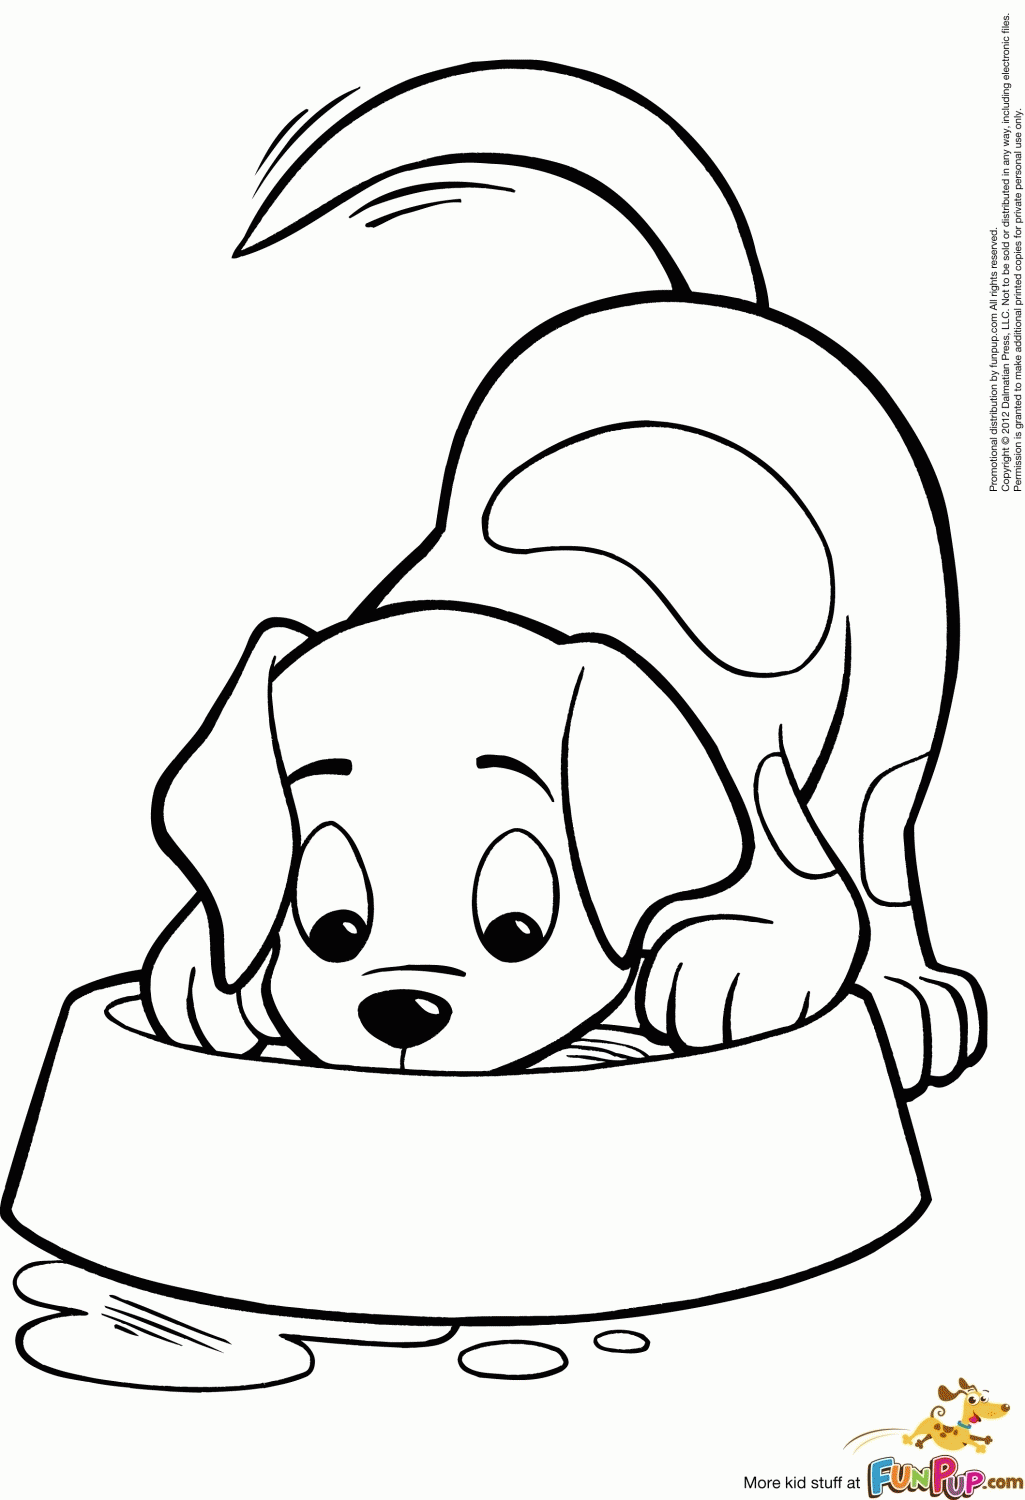 Kitten And Puppy Coloring Pages To Print Coloring Home